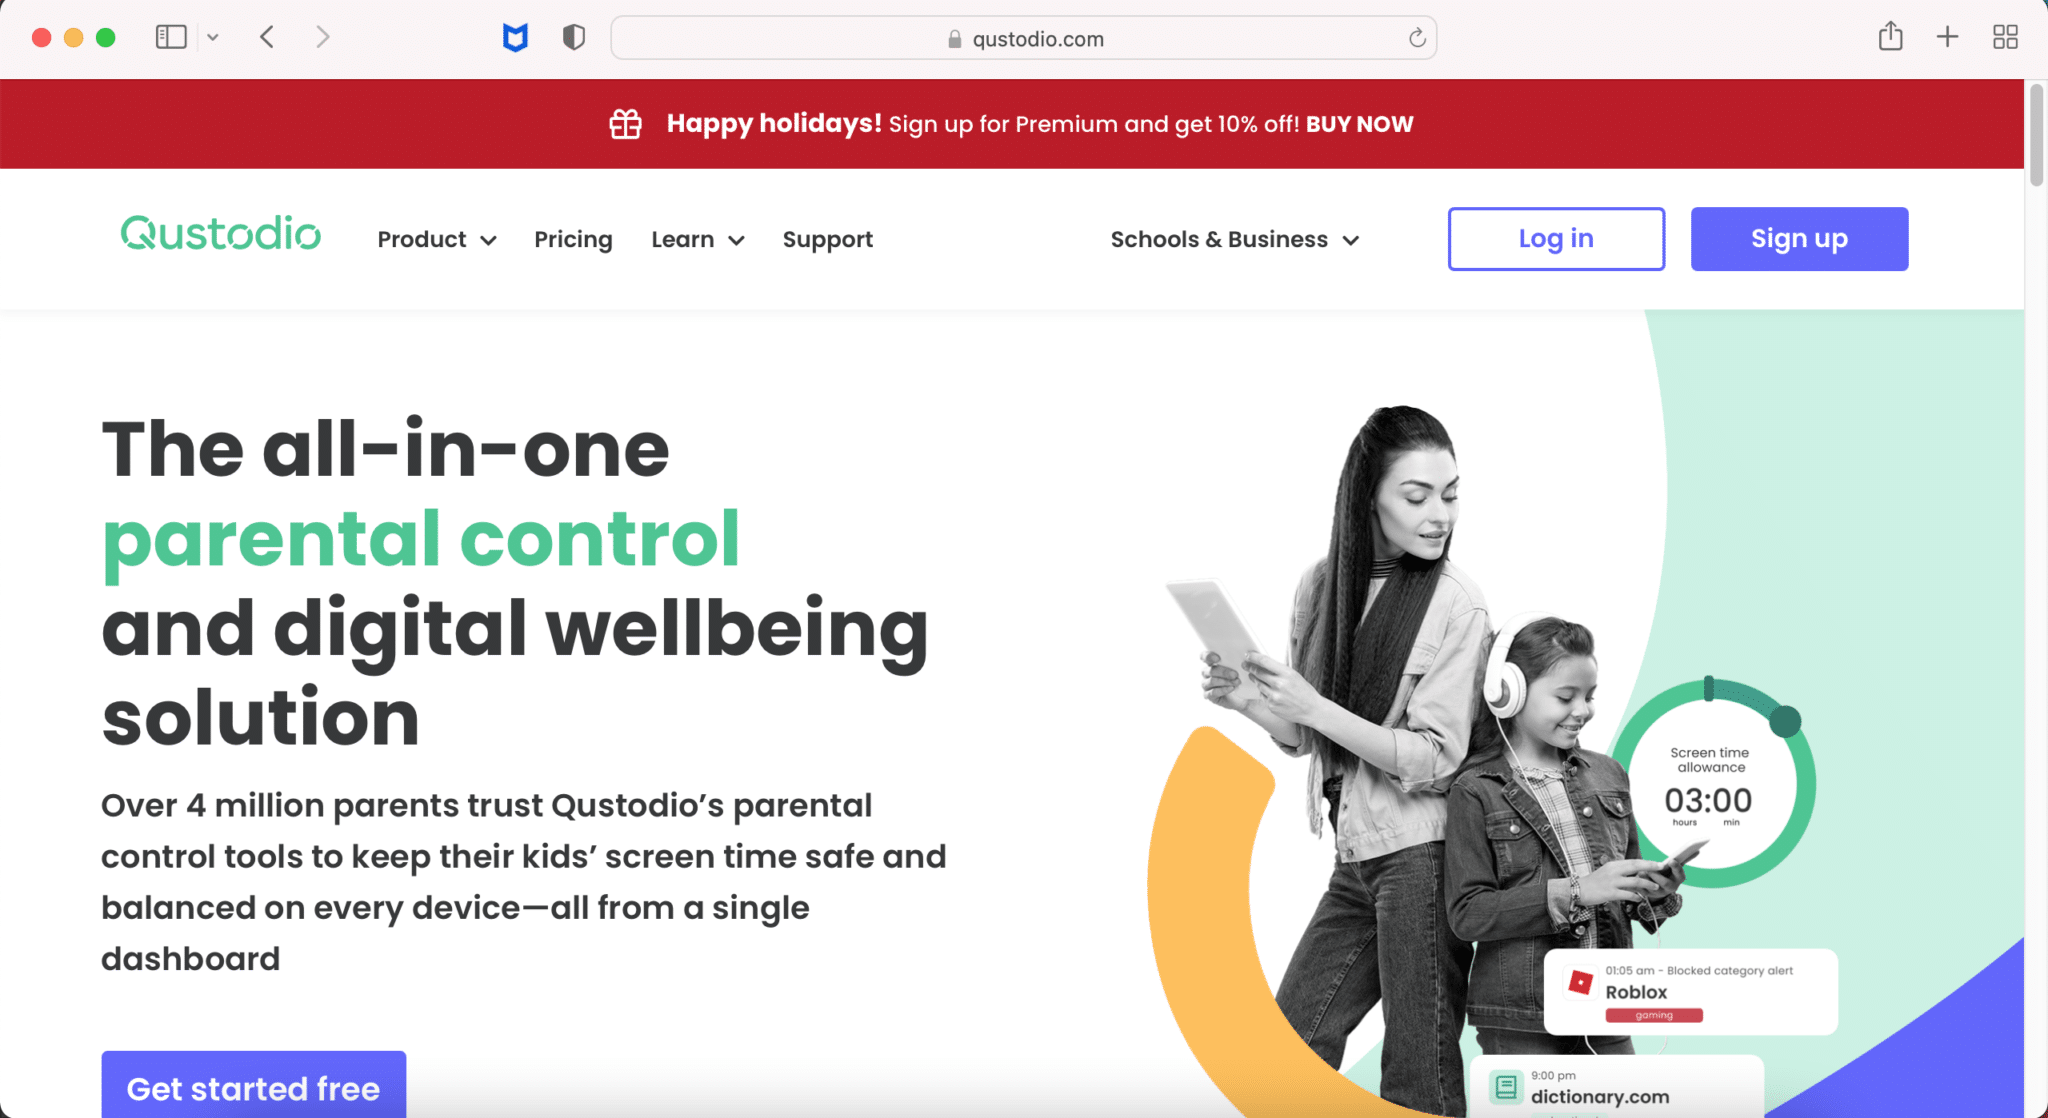 Qustodio - Parental control and digital wellbeing software